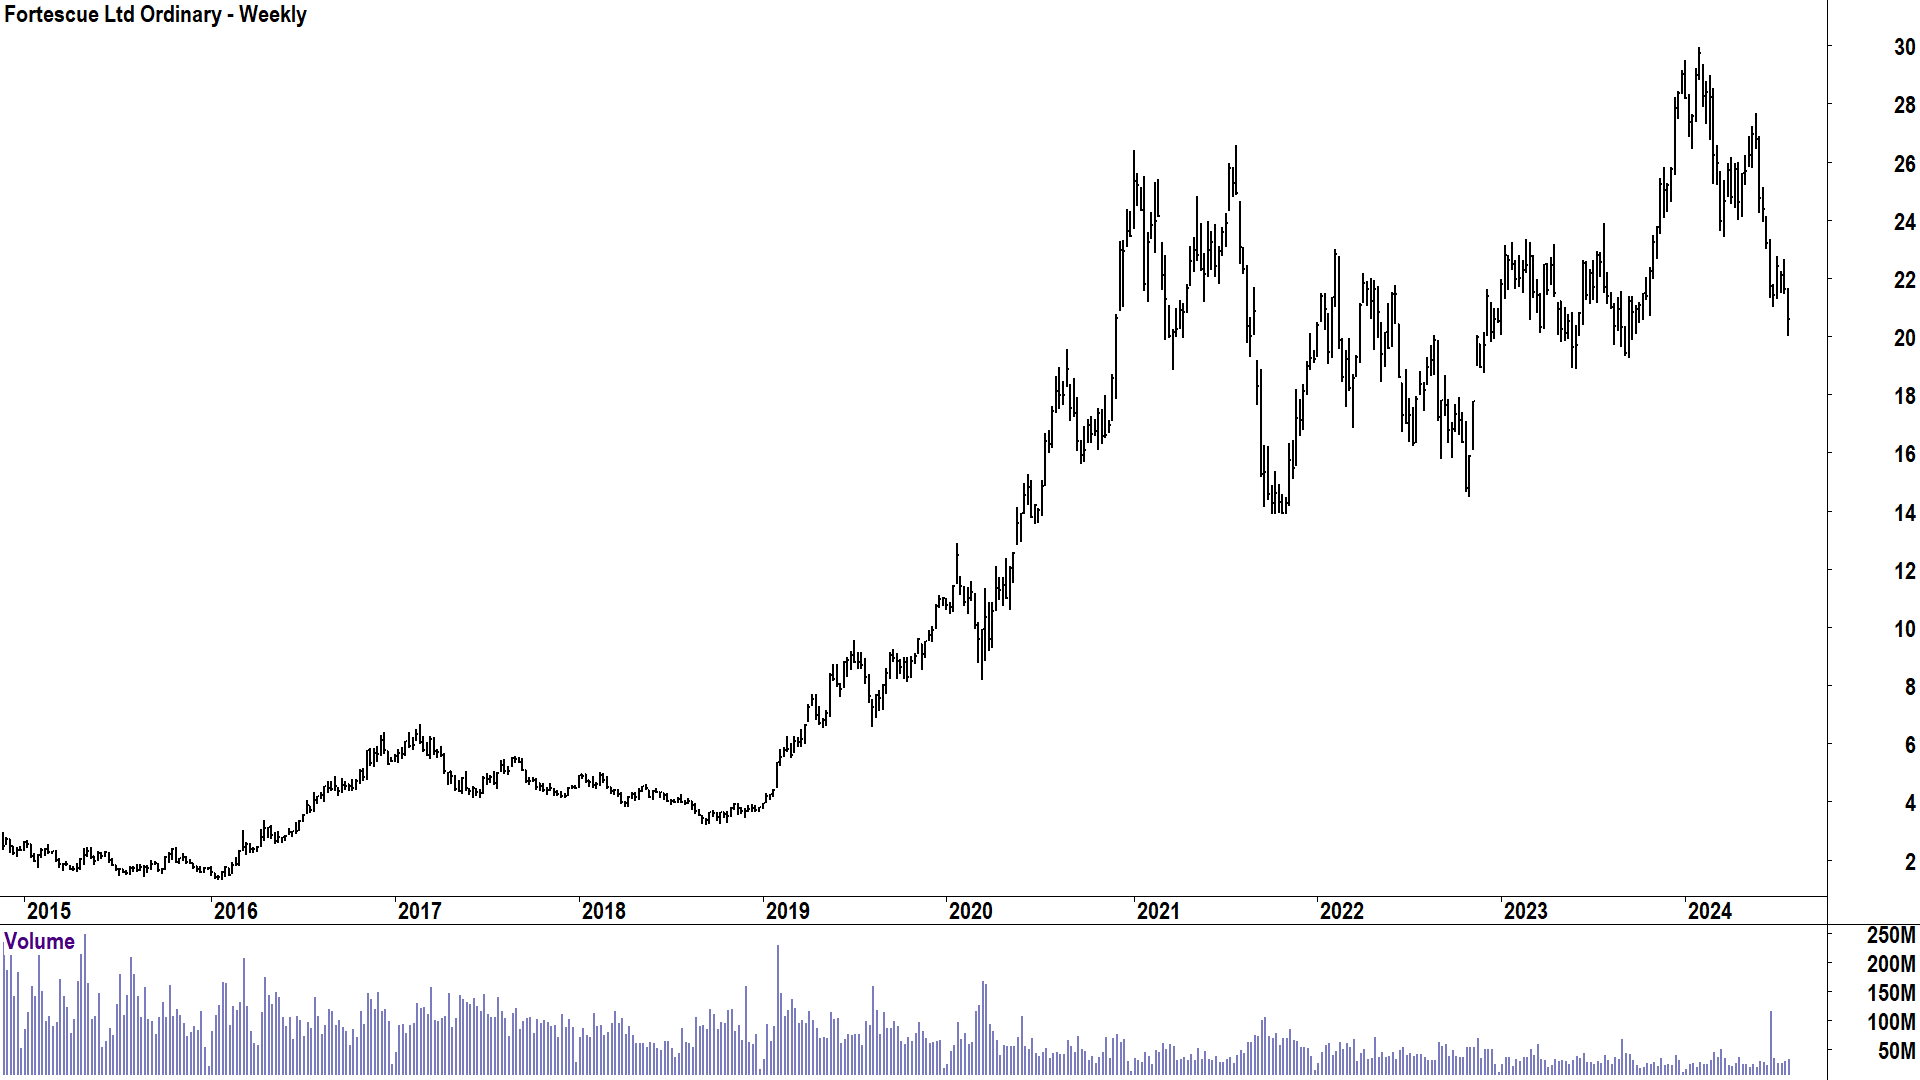 Fortescue price chart last 10 years